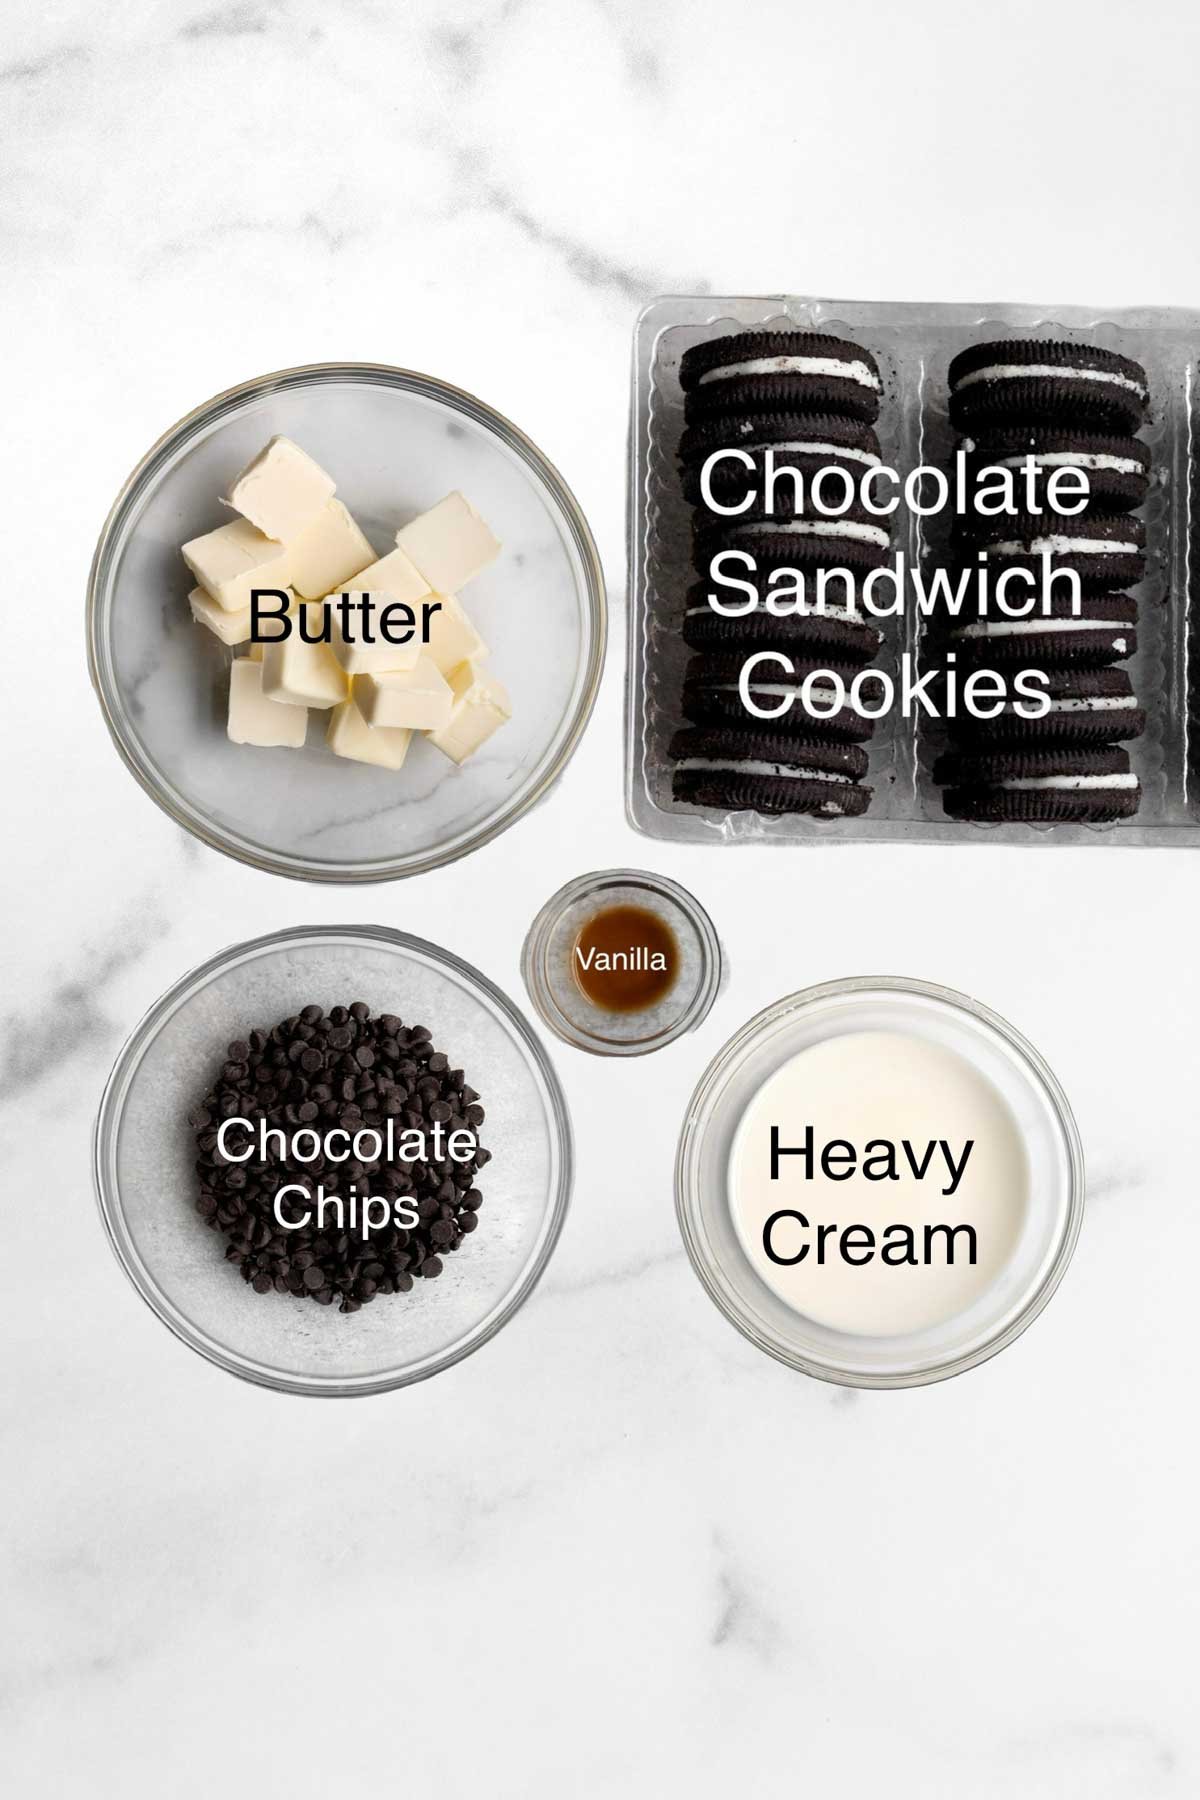 Butter, chocolate sandwich cookies, chocolate chips, vanilla and heavy cream in separate containers.